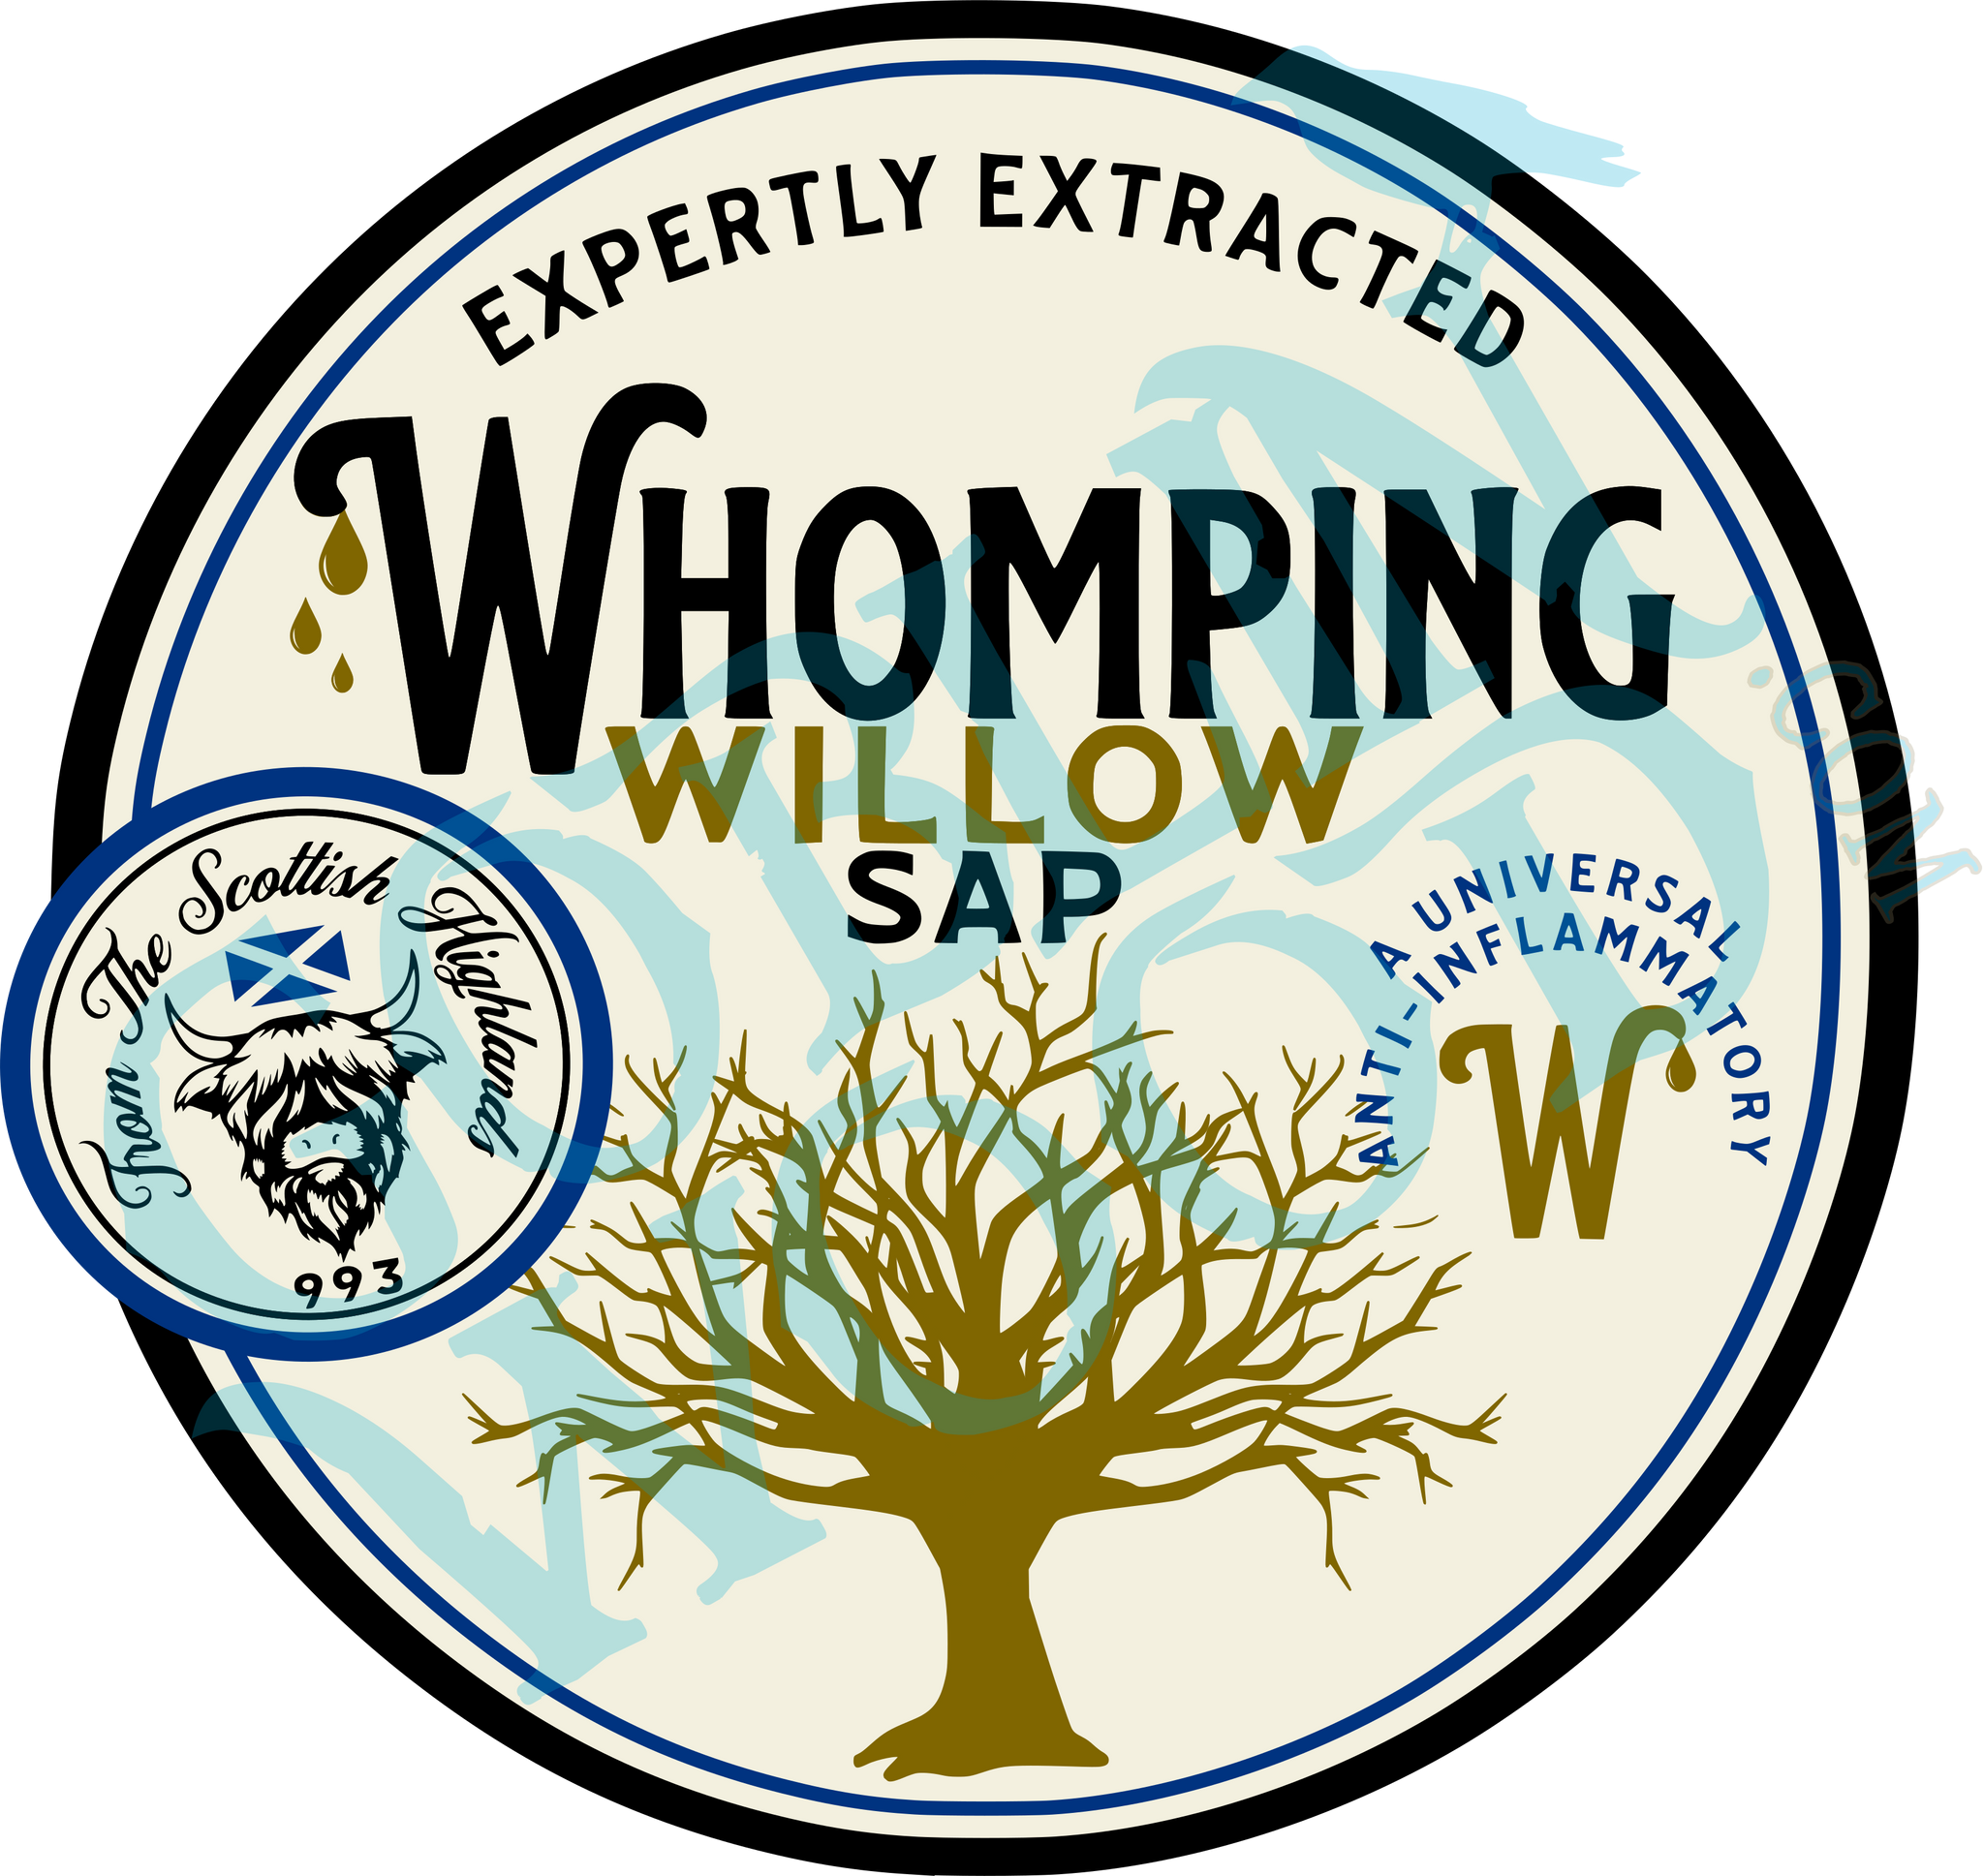 Whomping Willow Sap - Harry Potter Inspired